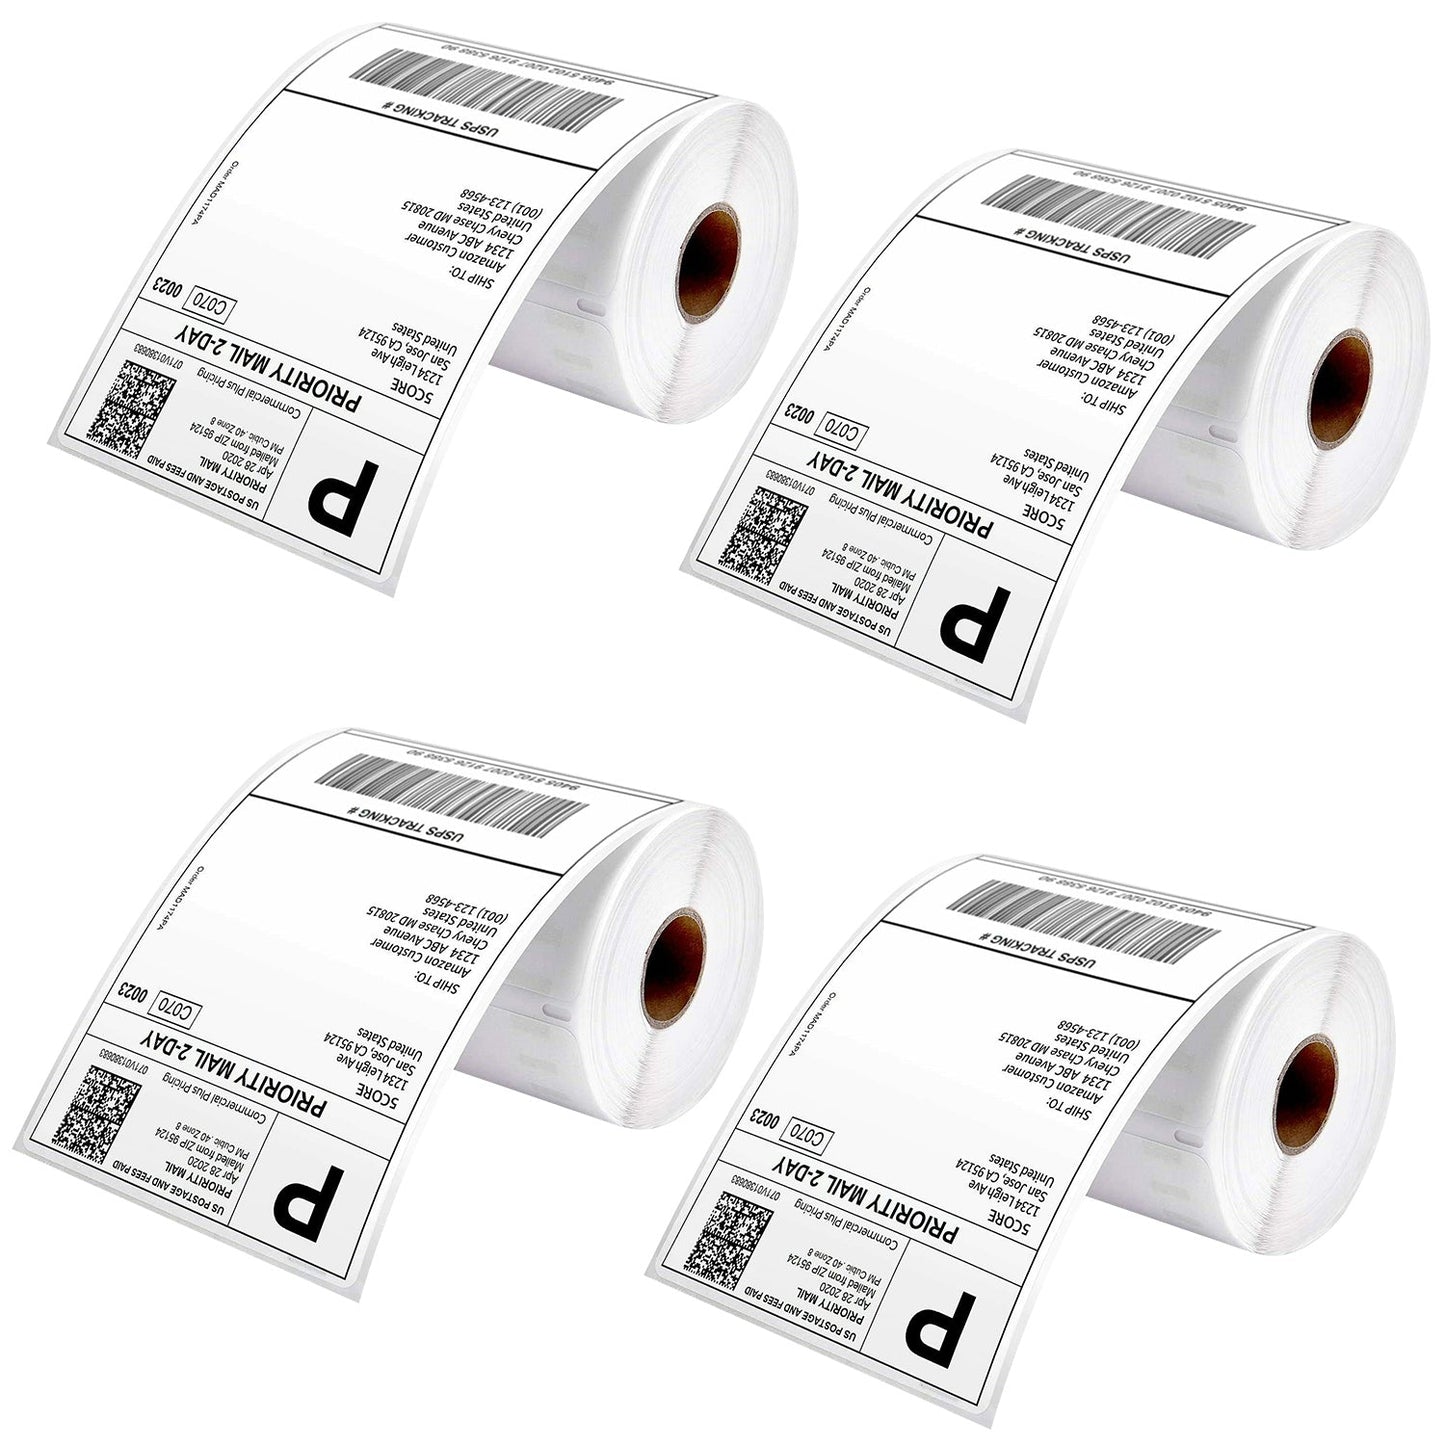 4"x6" Direct Thermal Shipping Label/ 4x6 4 Rolls Direct 250/paper Sticker/Perforated White Mailing Labels, Commercial Grade, Premium Adhesive, Compatible with Most Thermal Printers- DTL 4PK